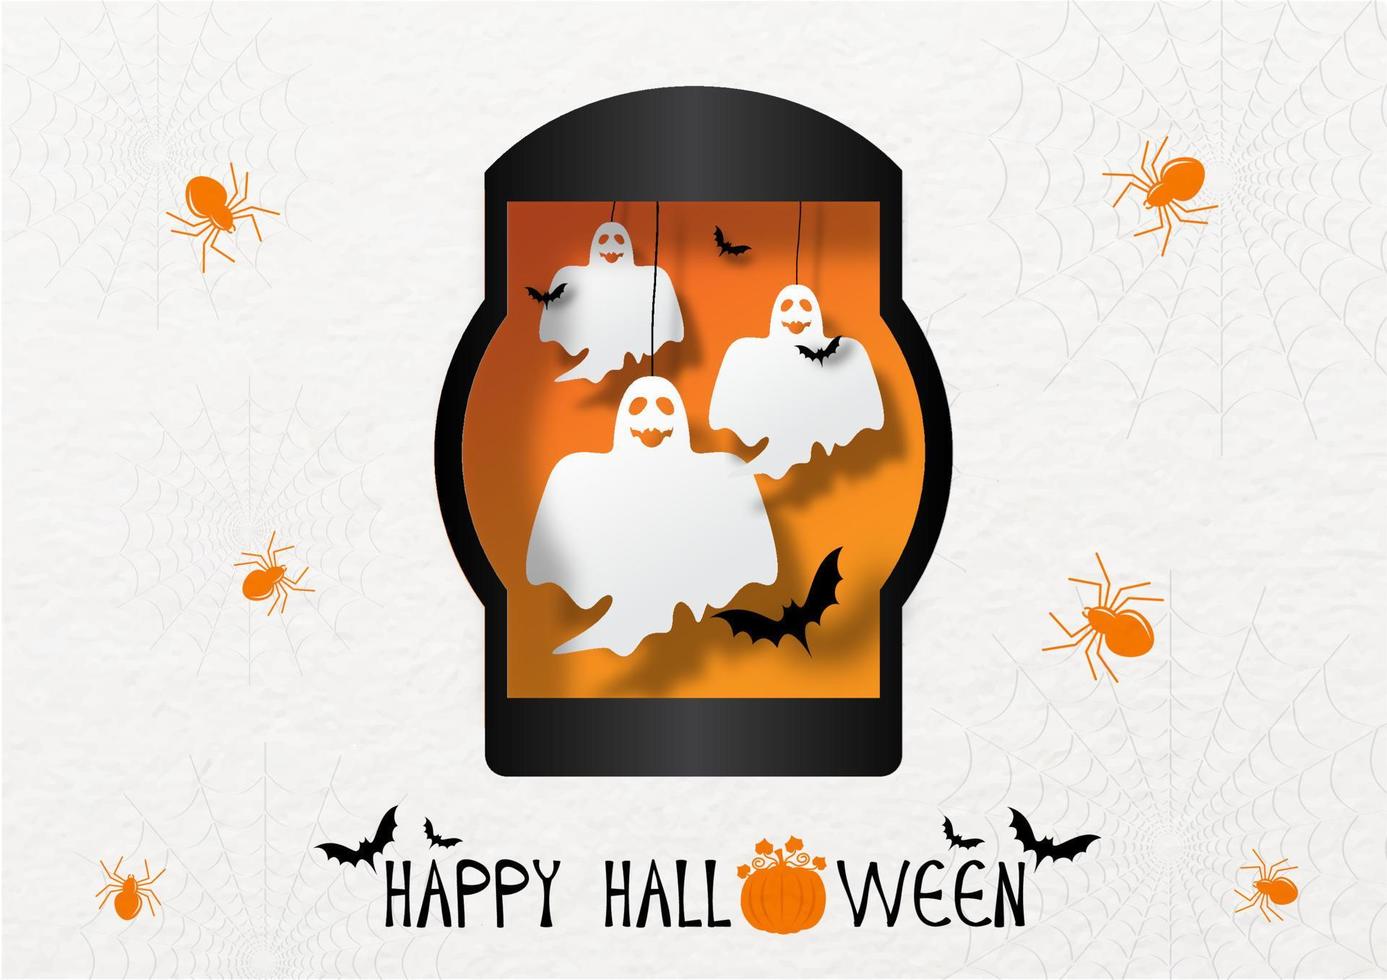 Halloween ghosts in a black lantern with flying bats and orange spiders with design of Happy Halloween lettering on paper pattern background. Halloween card in paper cut style. vector